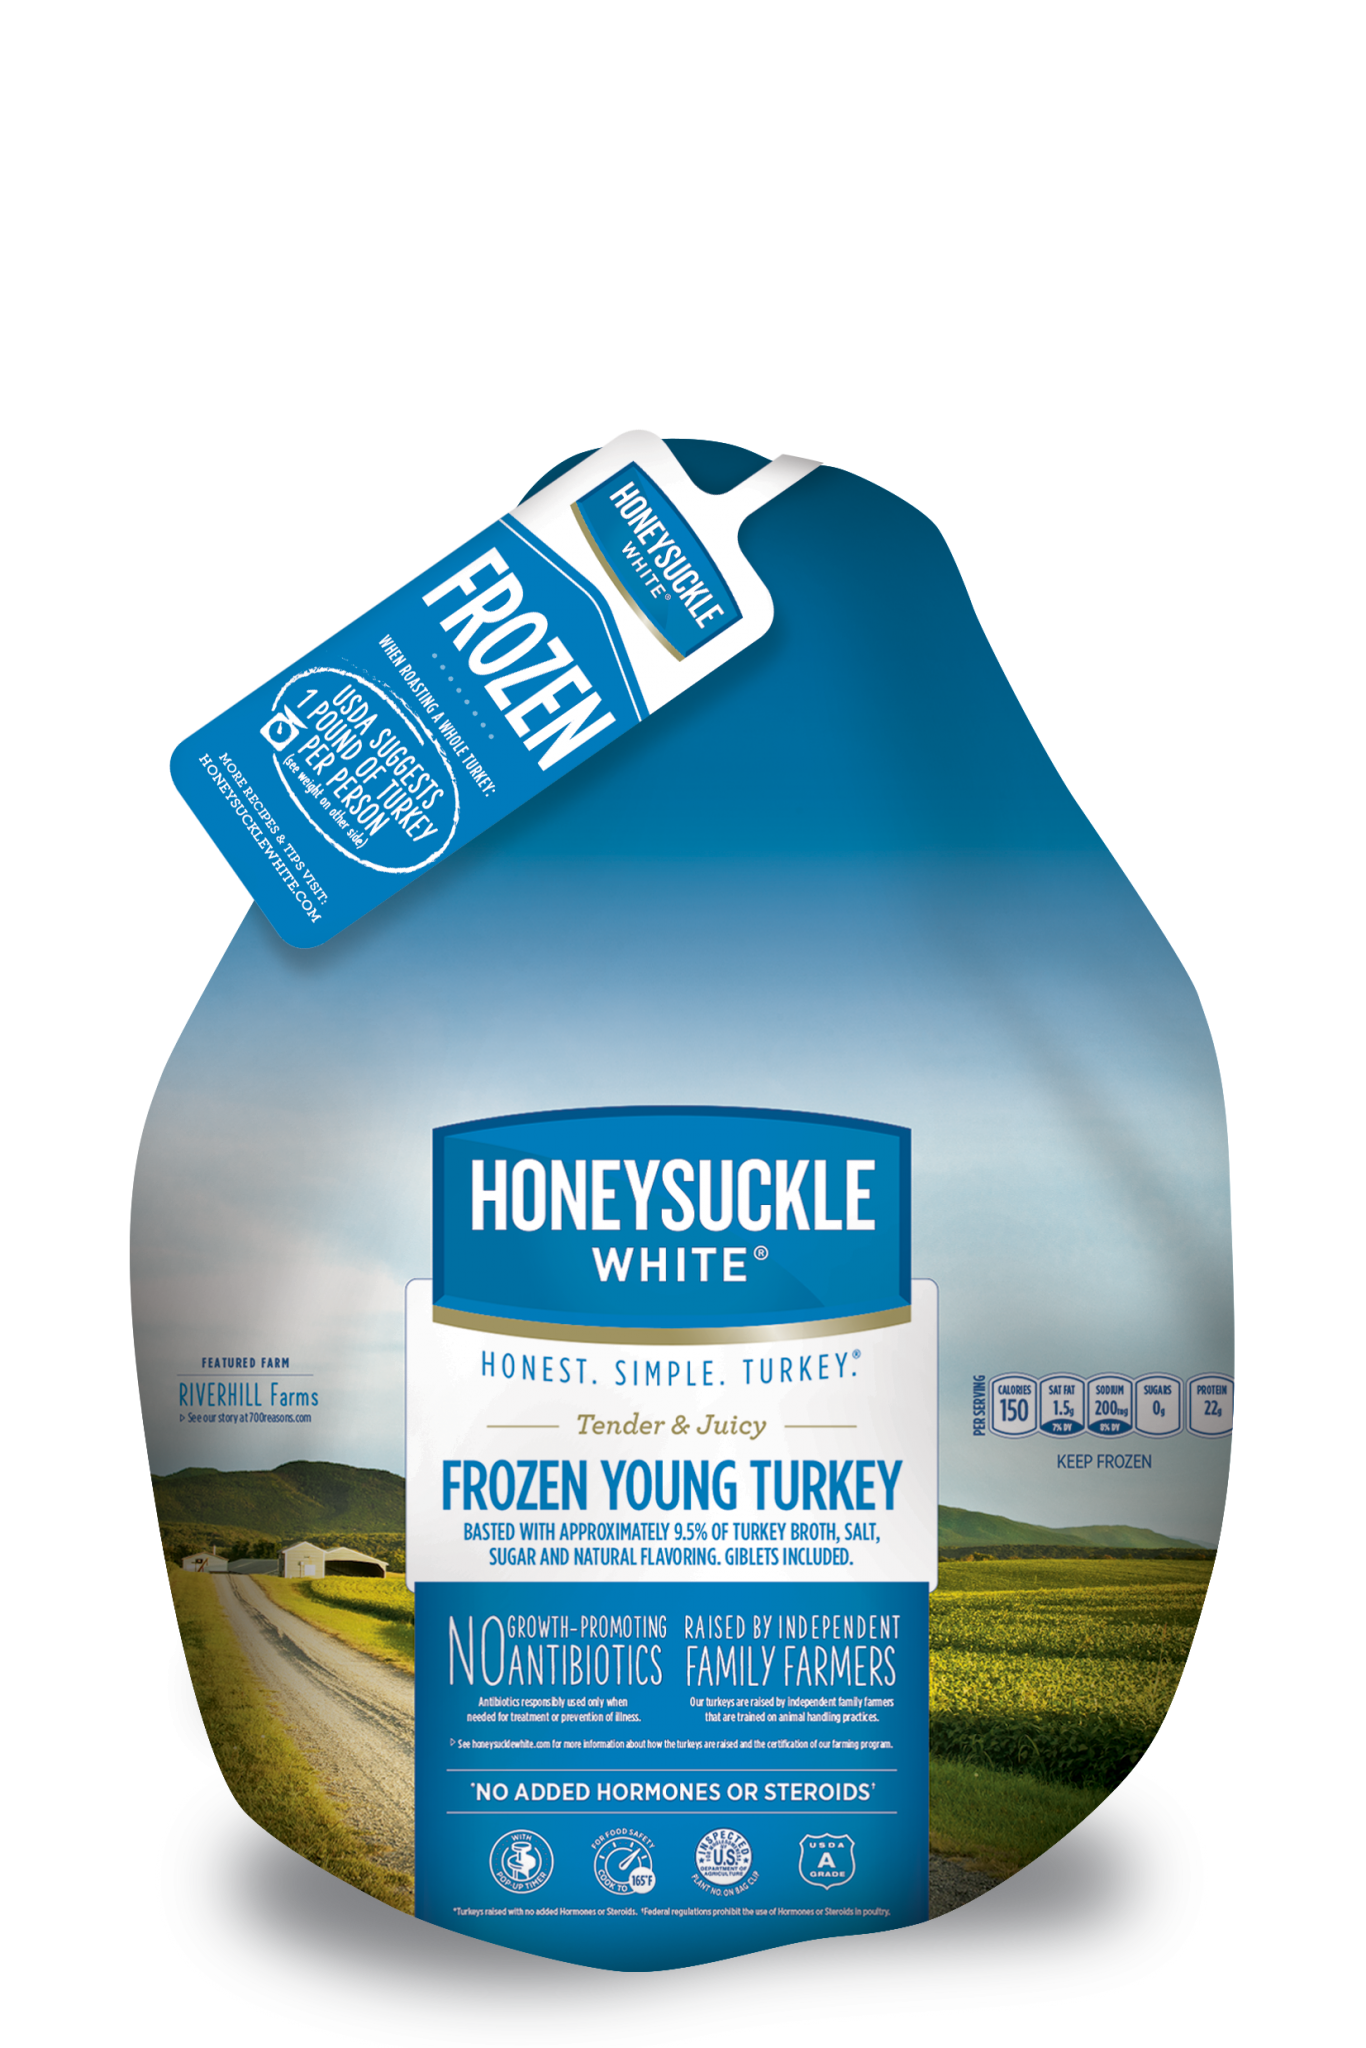 Frozen Young Turkey 10-14 lbs. - Find Where to Buy | Honeysuckle White